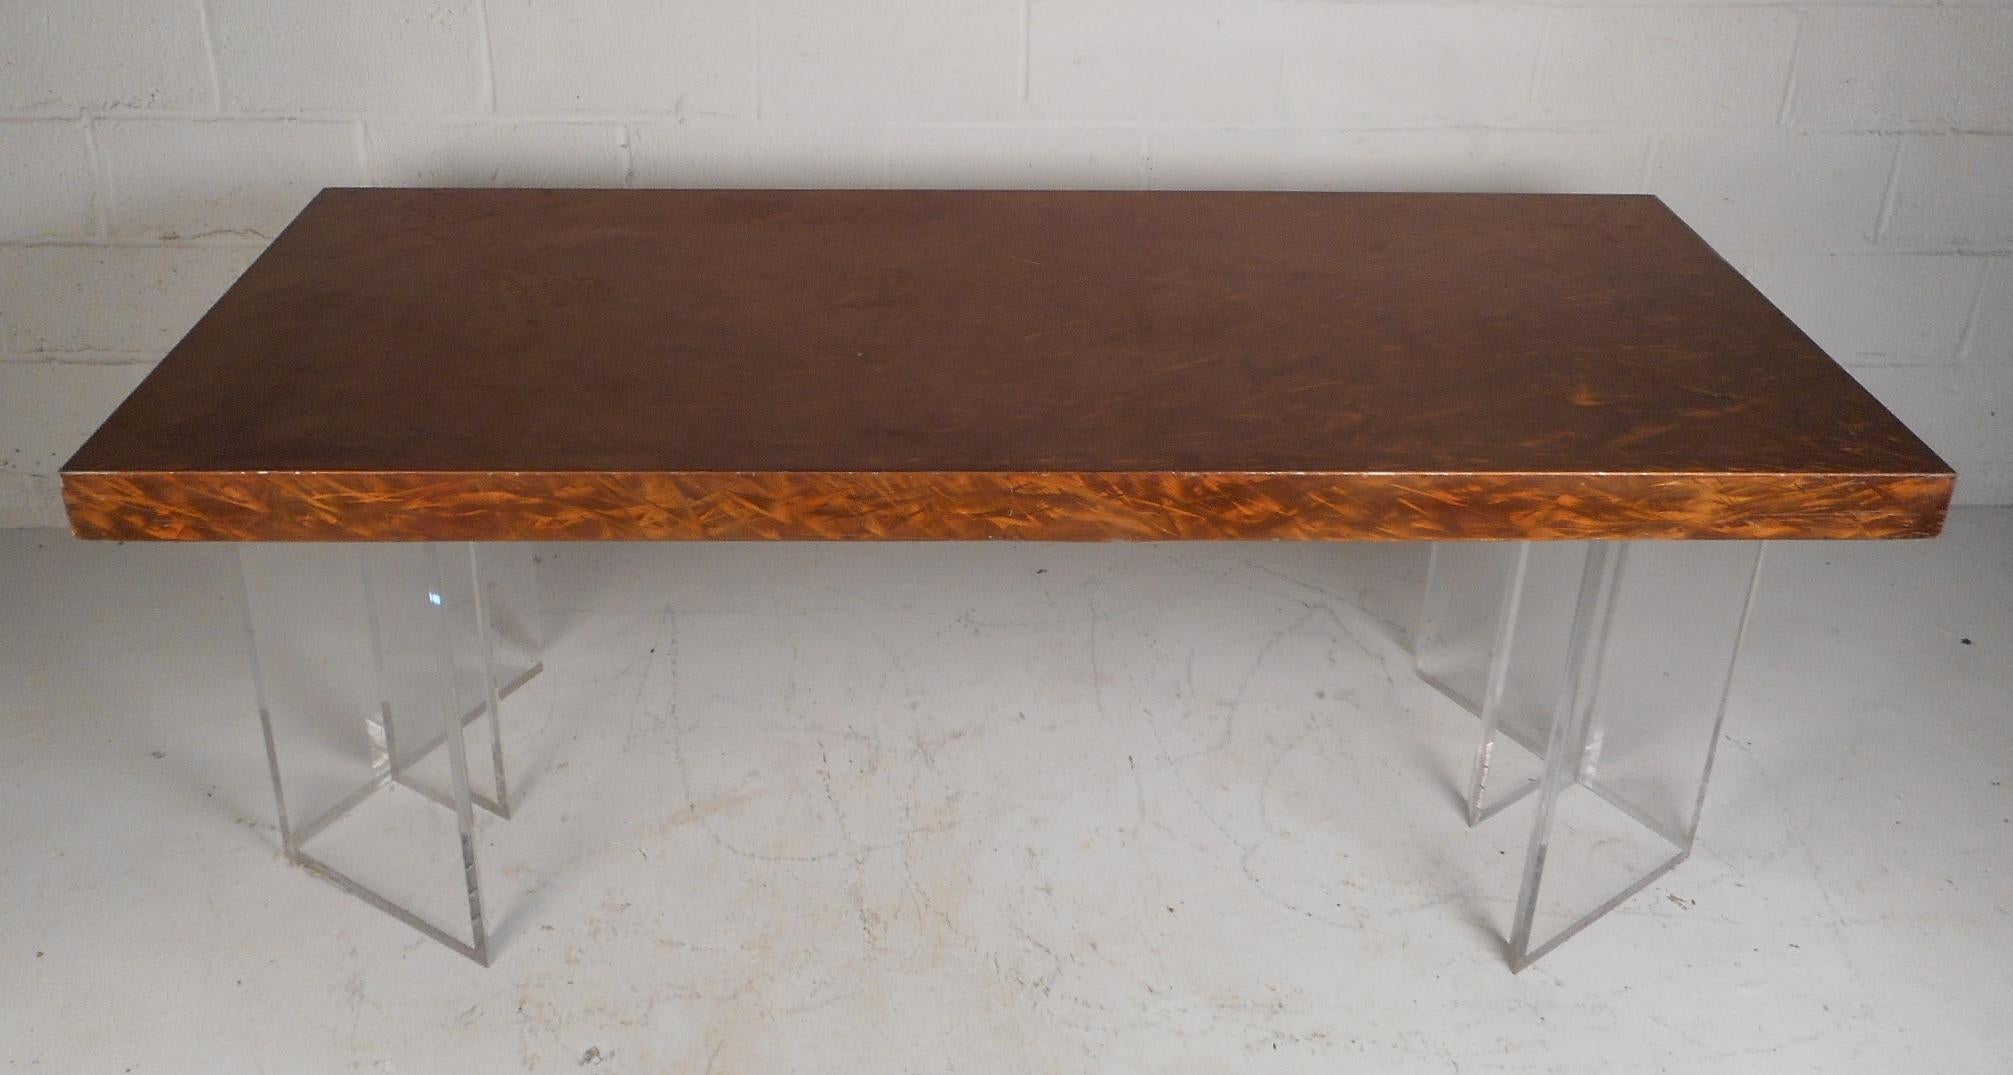 This gorgeous vintage modern dining table features a brushed metal top and a Lucite base. This one of a kind piece has two separate Lucite pieces supporting the table top. A sleek design with a brass and copper colored finish on the top. This table